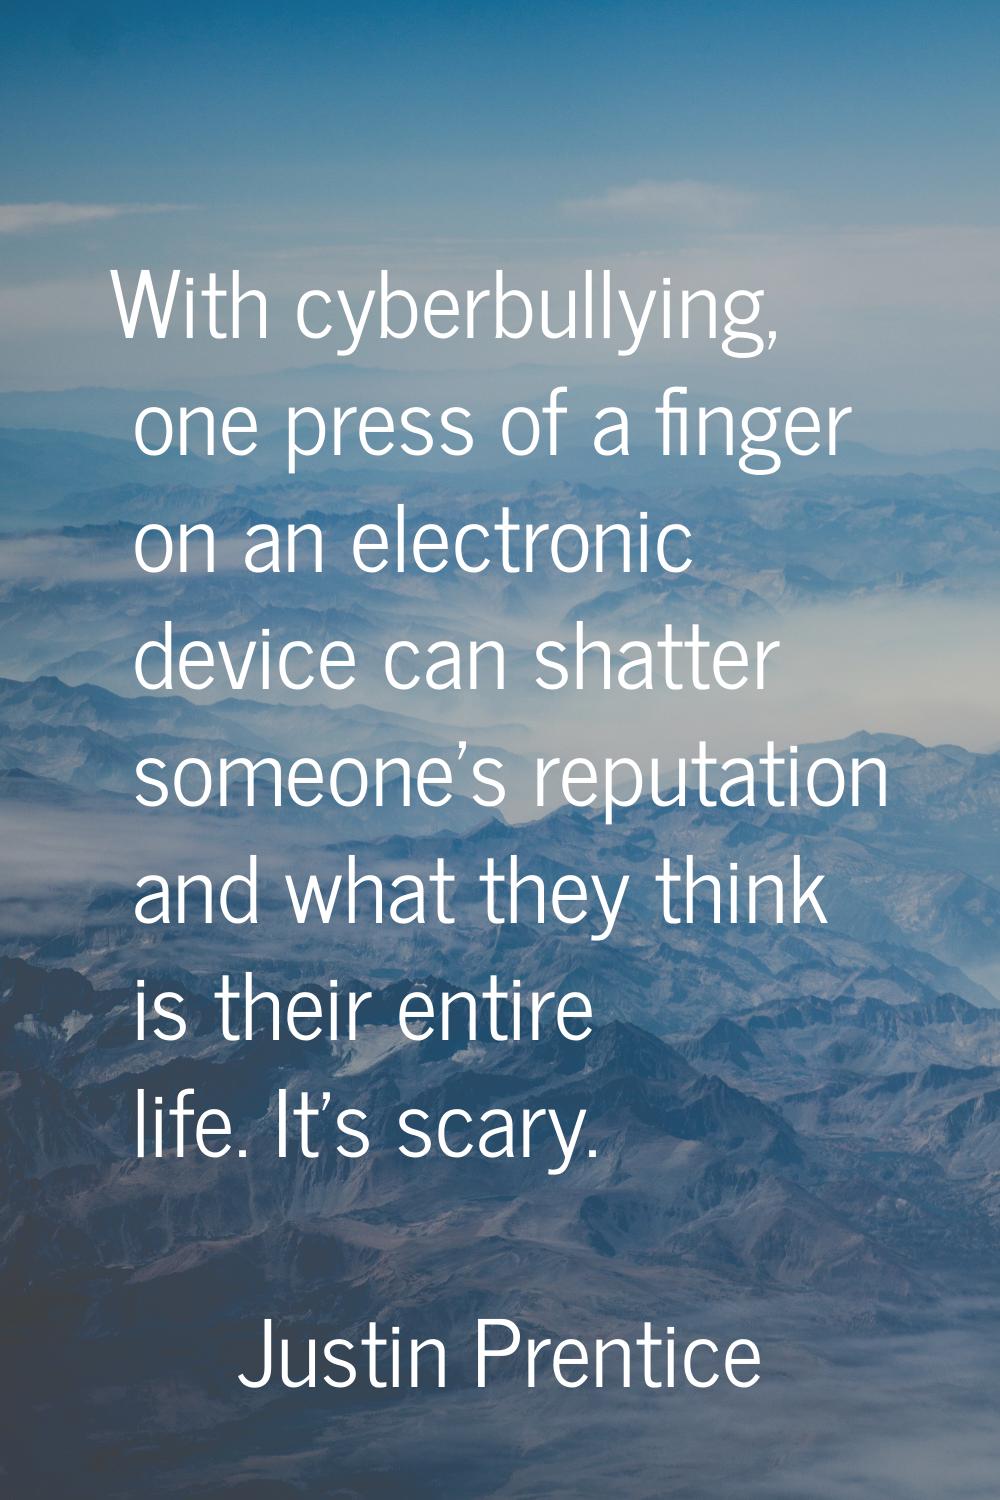 With cyberbullying, one press of a finger on an electronic device can shatter someone's reputation 